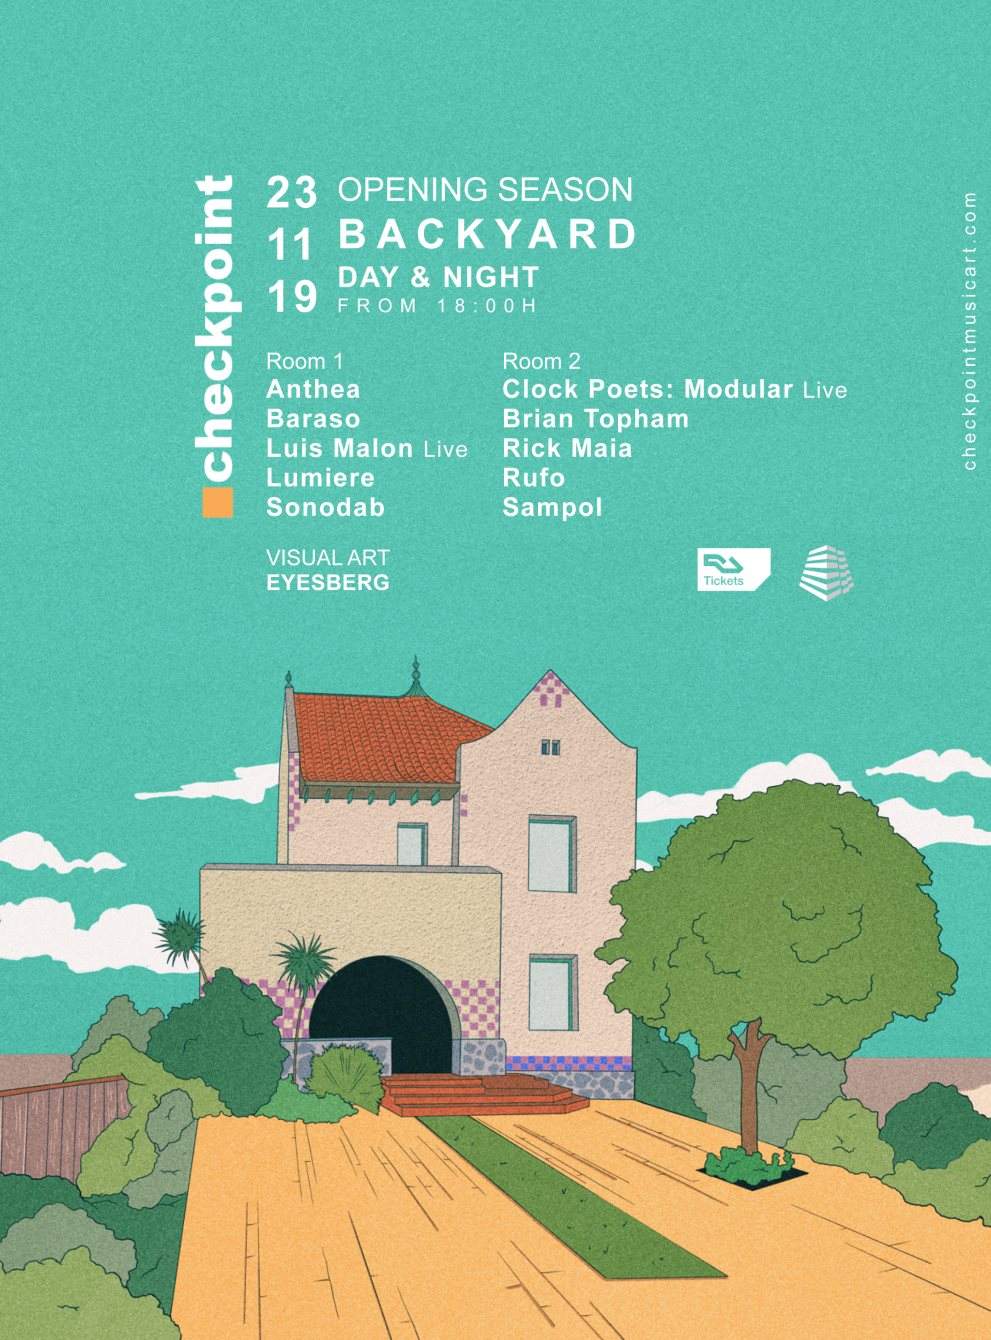 ■ Checkpoint Backyard Opening Season (Sold Out) - New Location - フライヤー表